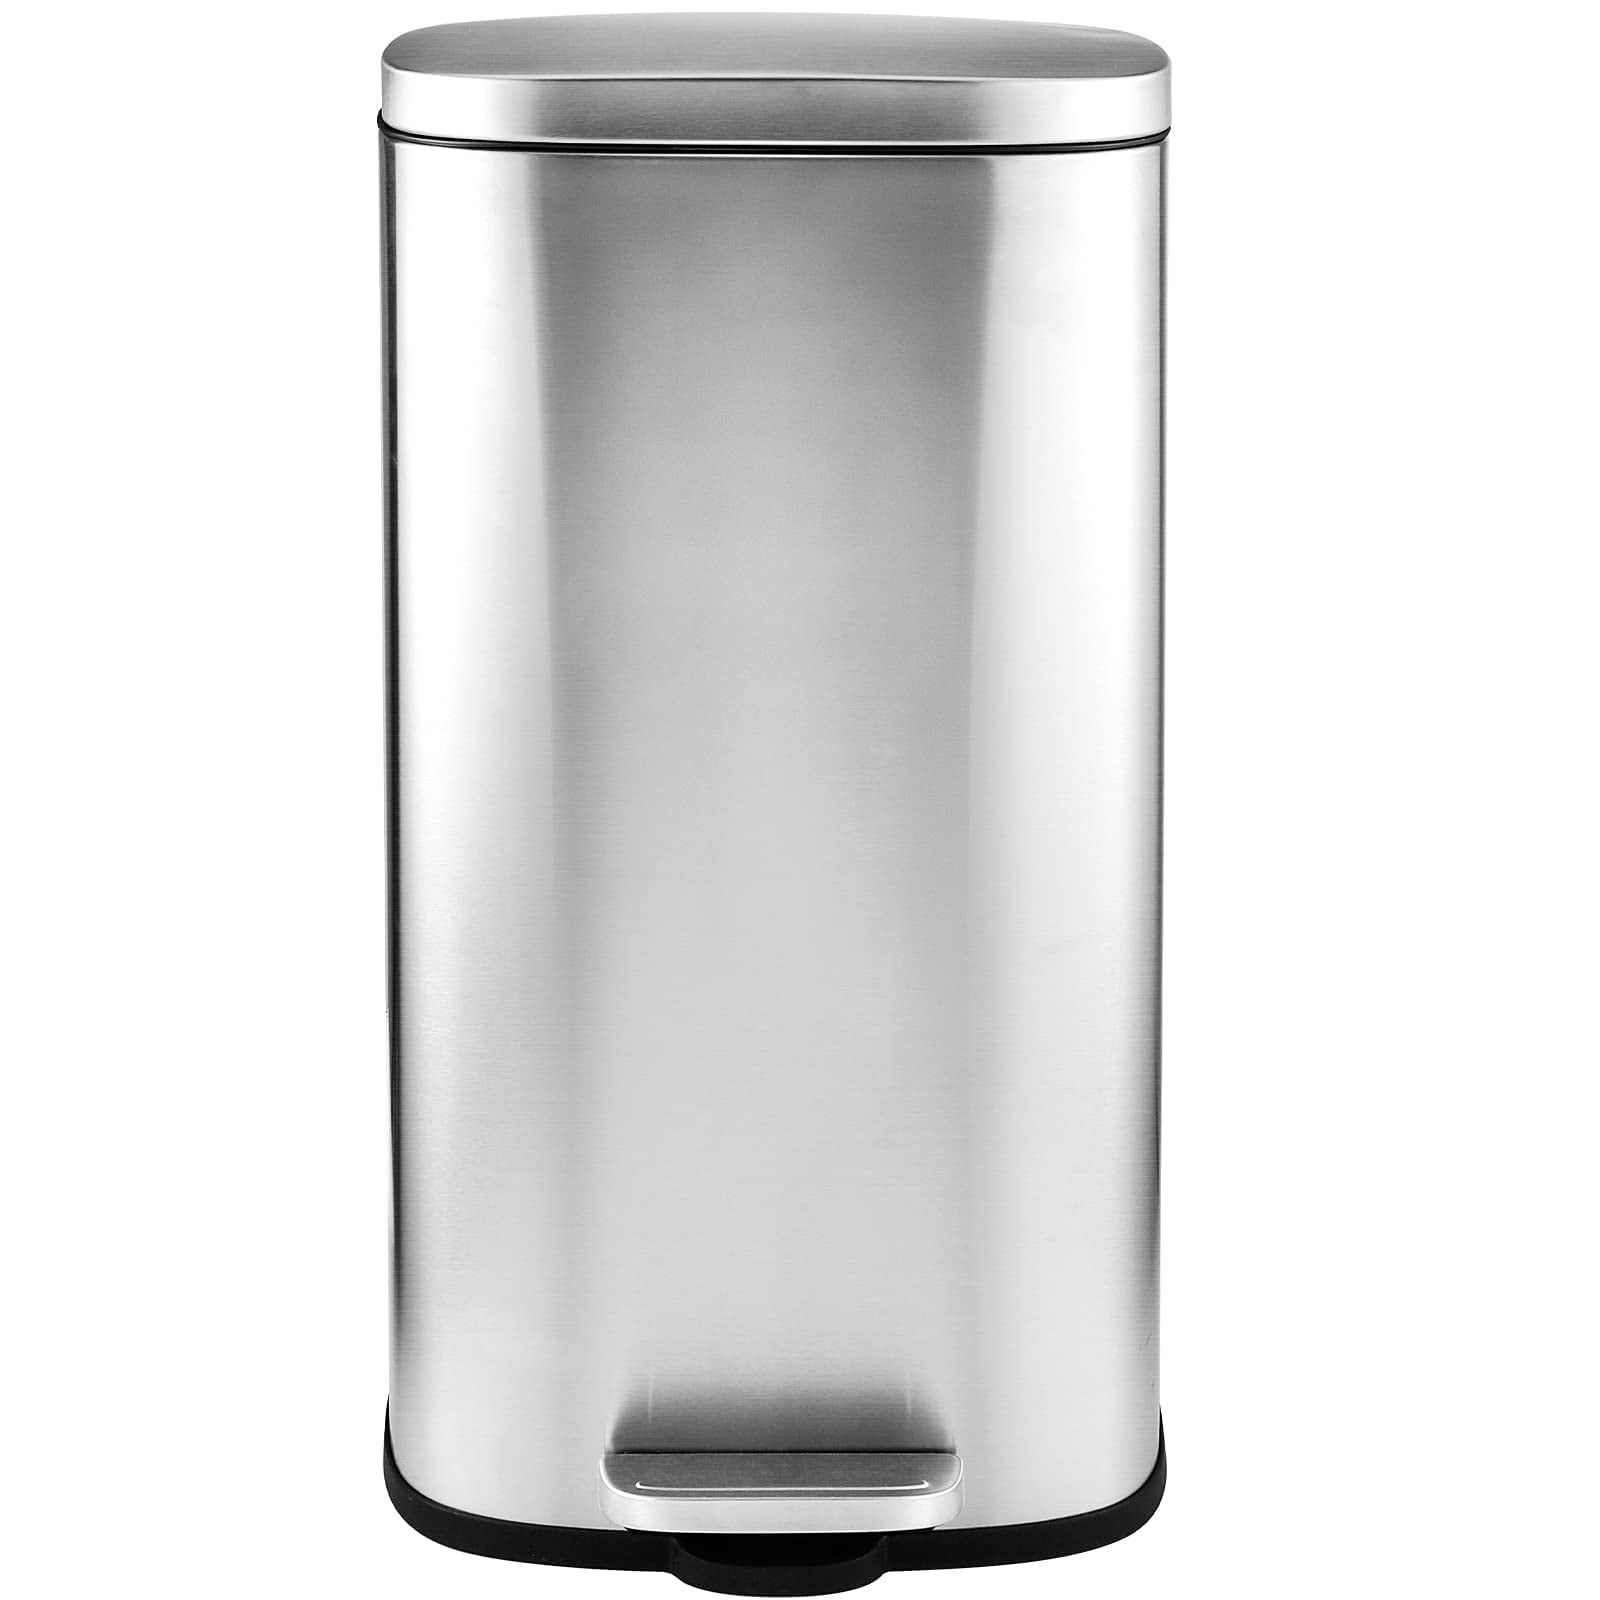 https://ak1.ostkcdn.com/images/products/is/images/direct/69a862731f61b5a37efcad1eb2e9c6d4d47093c0/8-Gallon-Trash-Can%2C-30L-Stainless-Steel-Kitchen-Garbage-Can%2C-Waste-Bin-with-Hinged-Lid-and-Inner-Bucket%2C-Soft-Close%2C-Dustbin.jpg